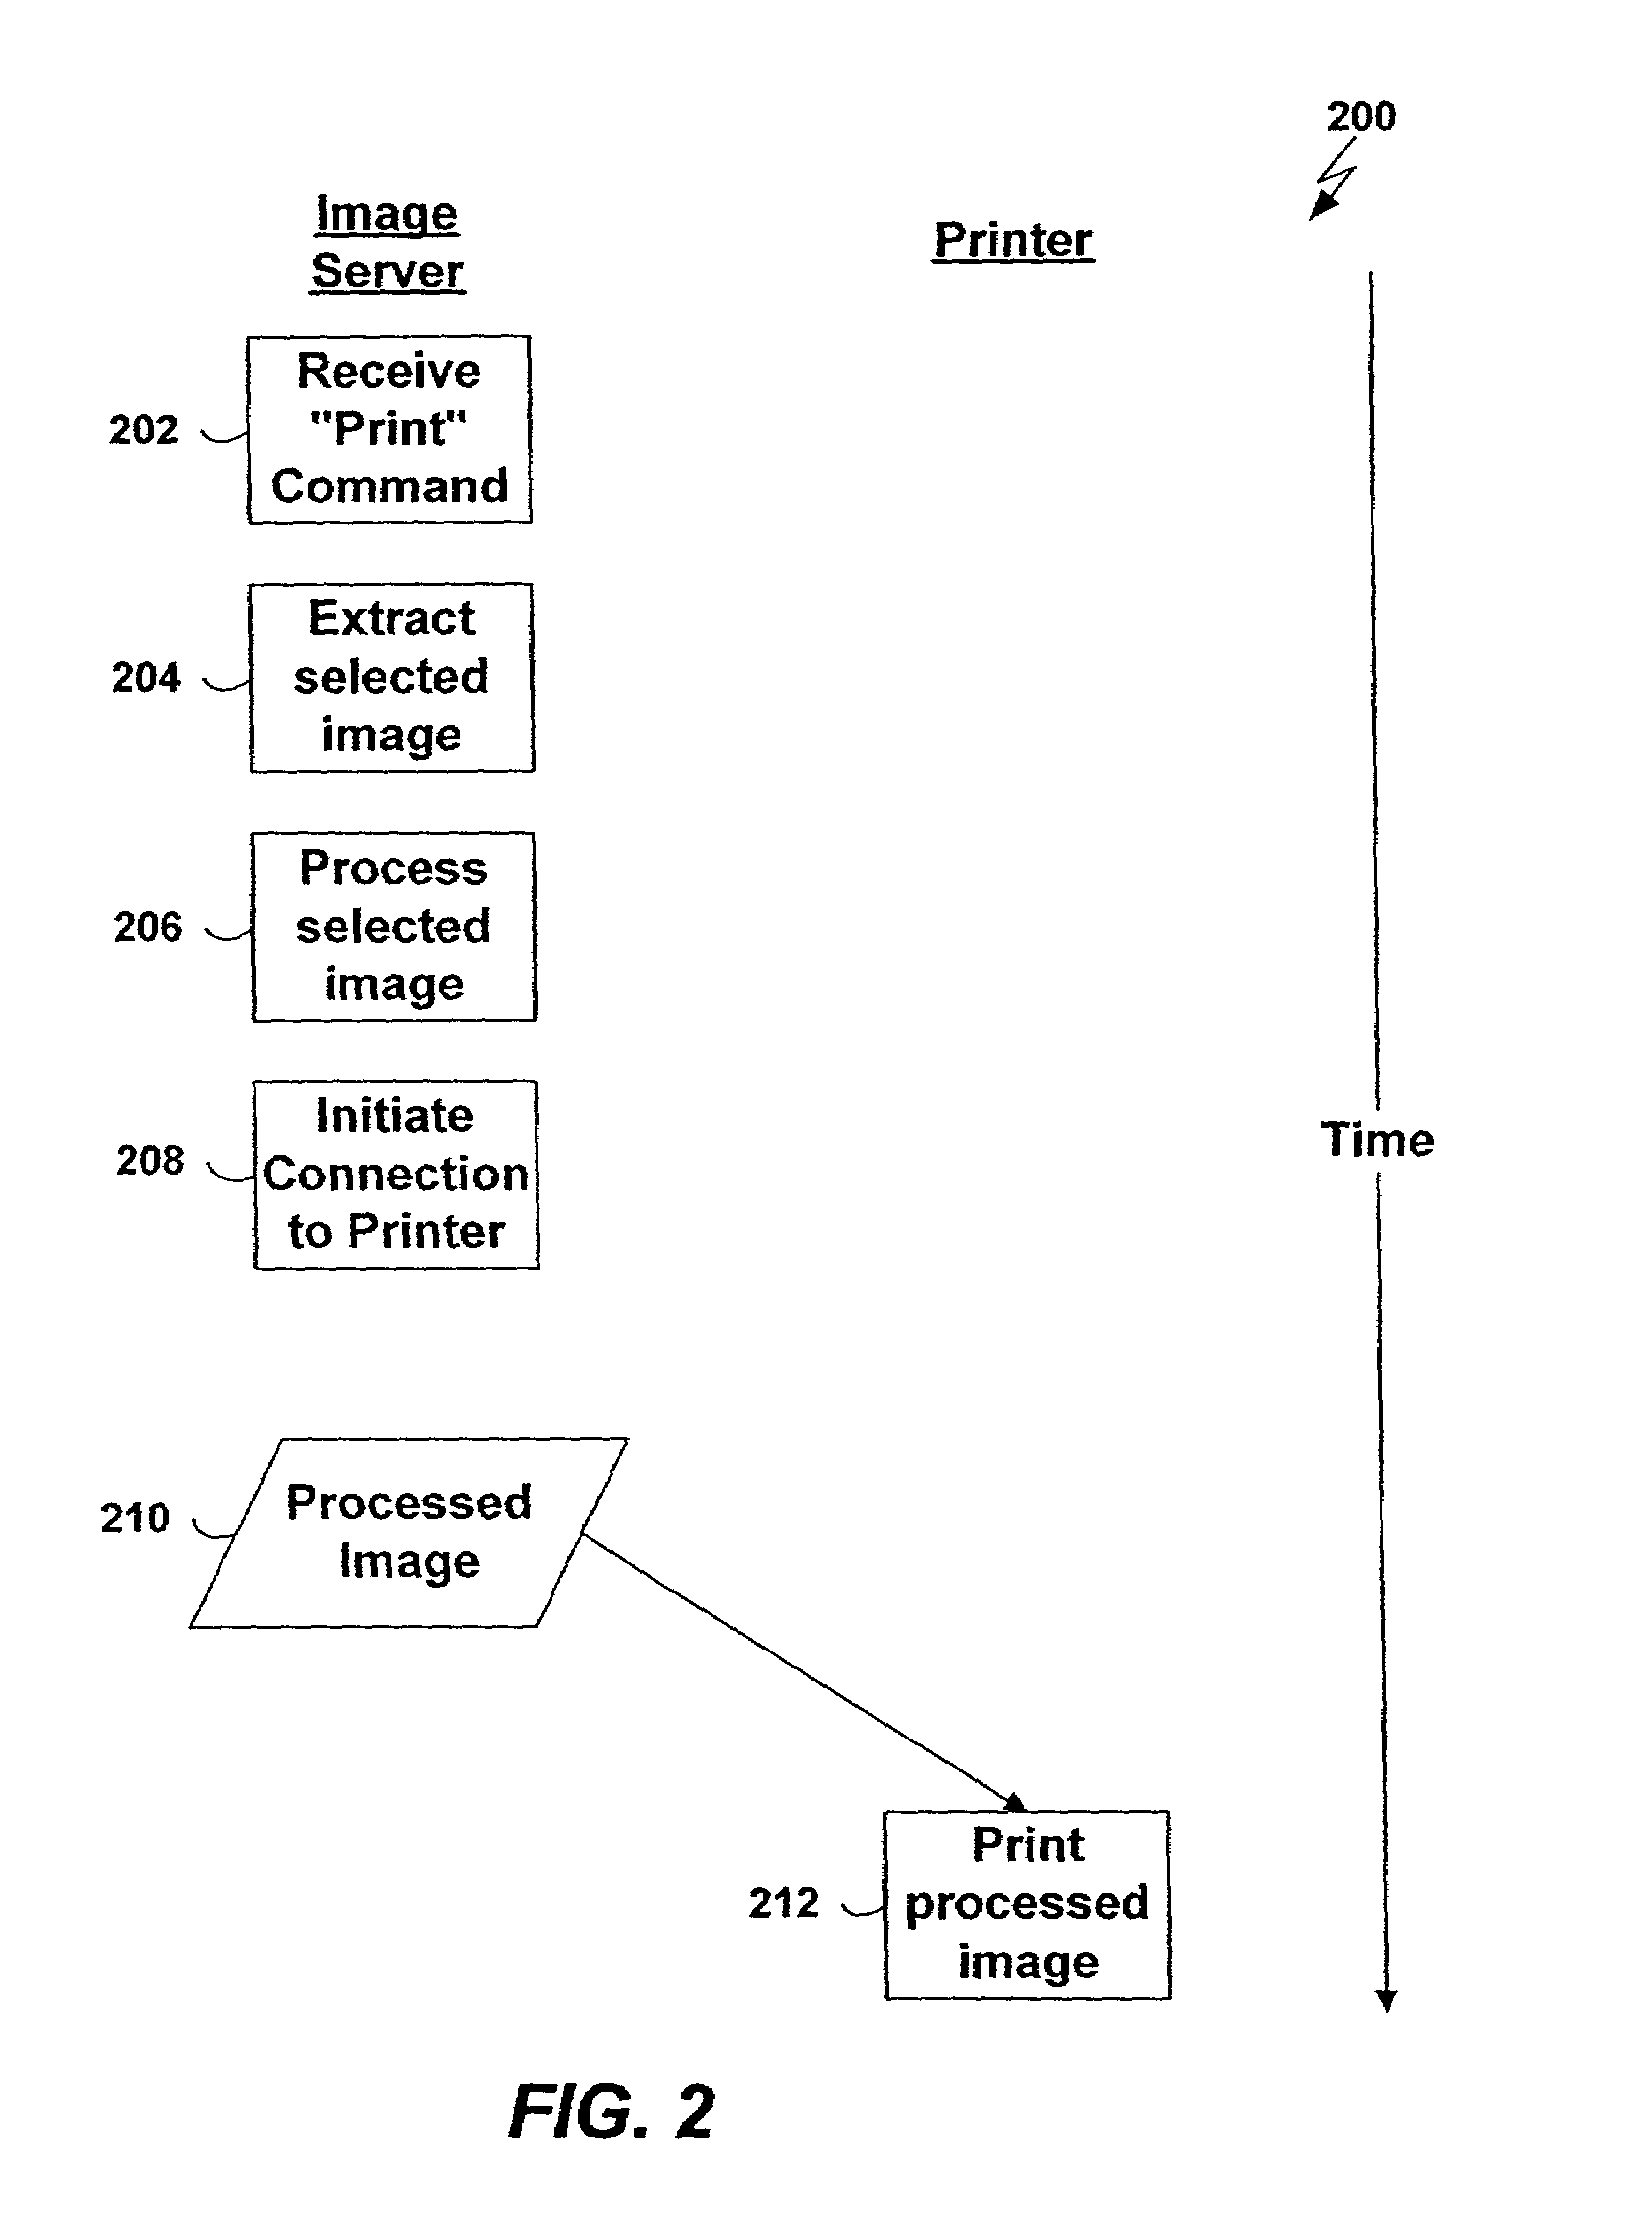 Method and apparatus for printing remote images using a network-enabled printer